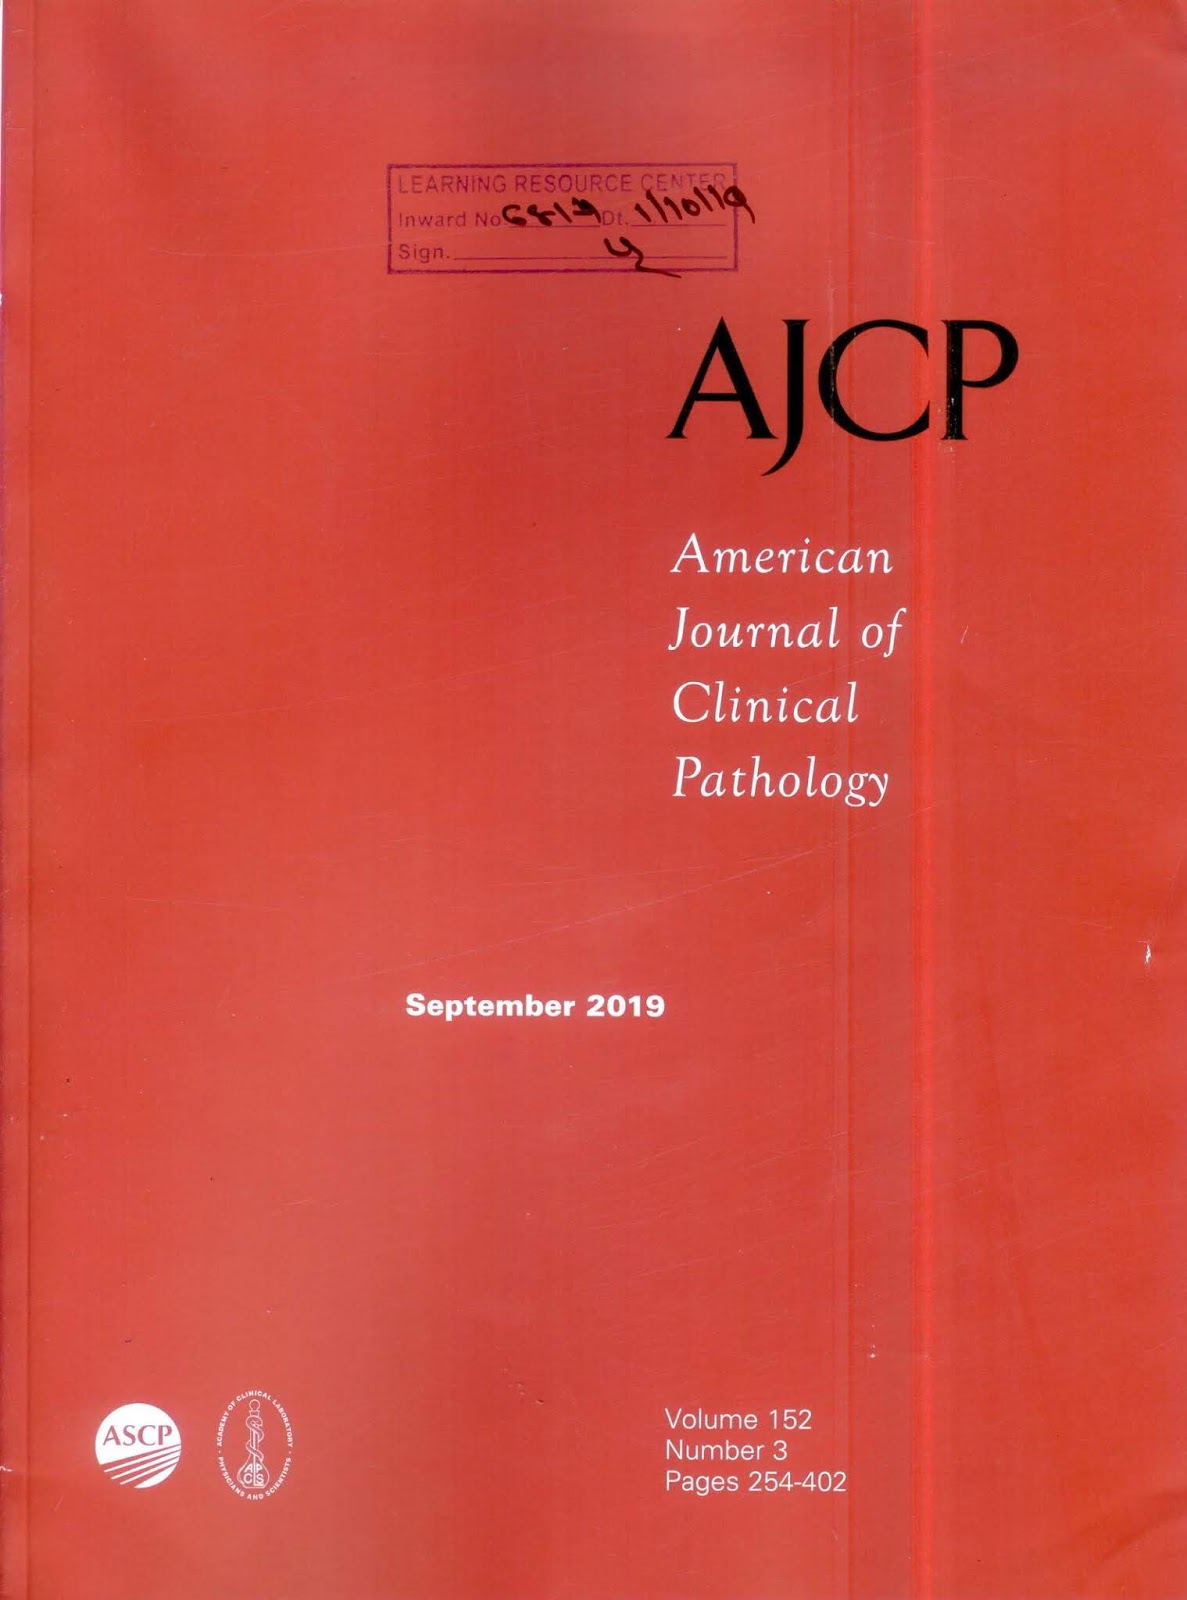 https://academic.oup.com/ajcp/issue/152/3